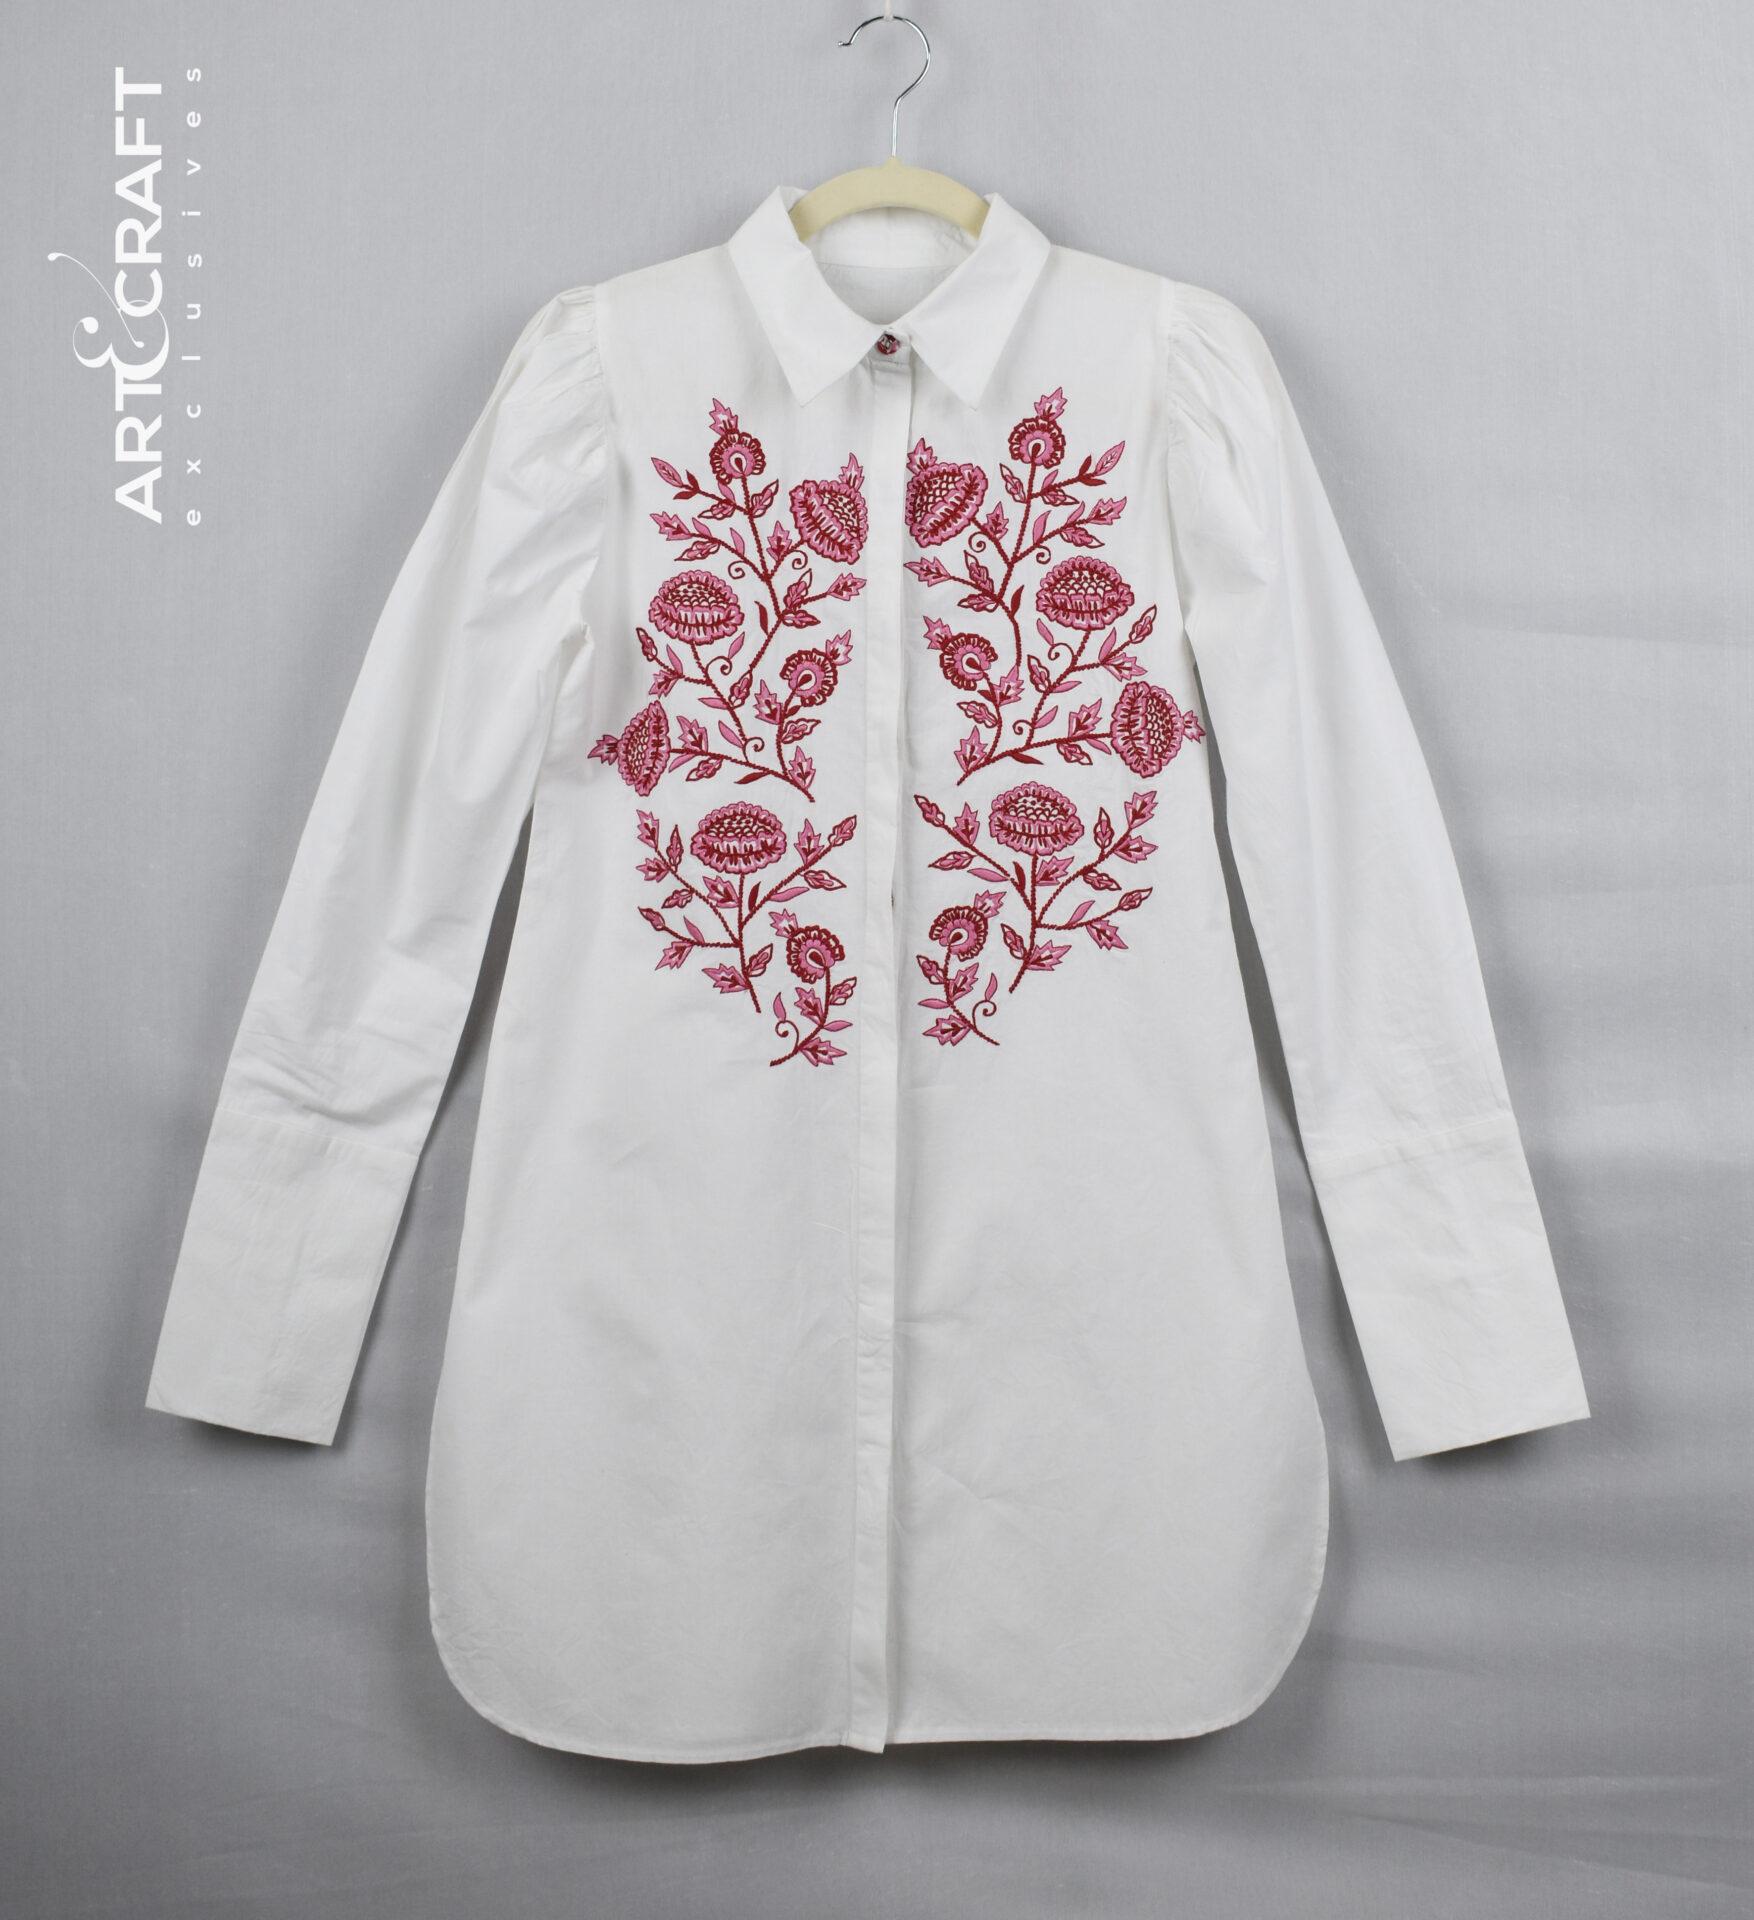 Product Cotton Cambric White Top - Art & Craft Exclusives: Clothing Manufacturers in India image